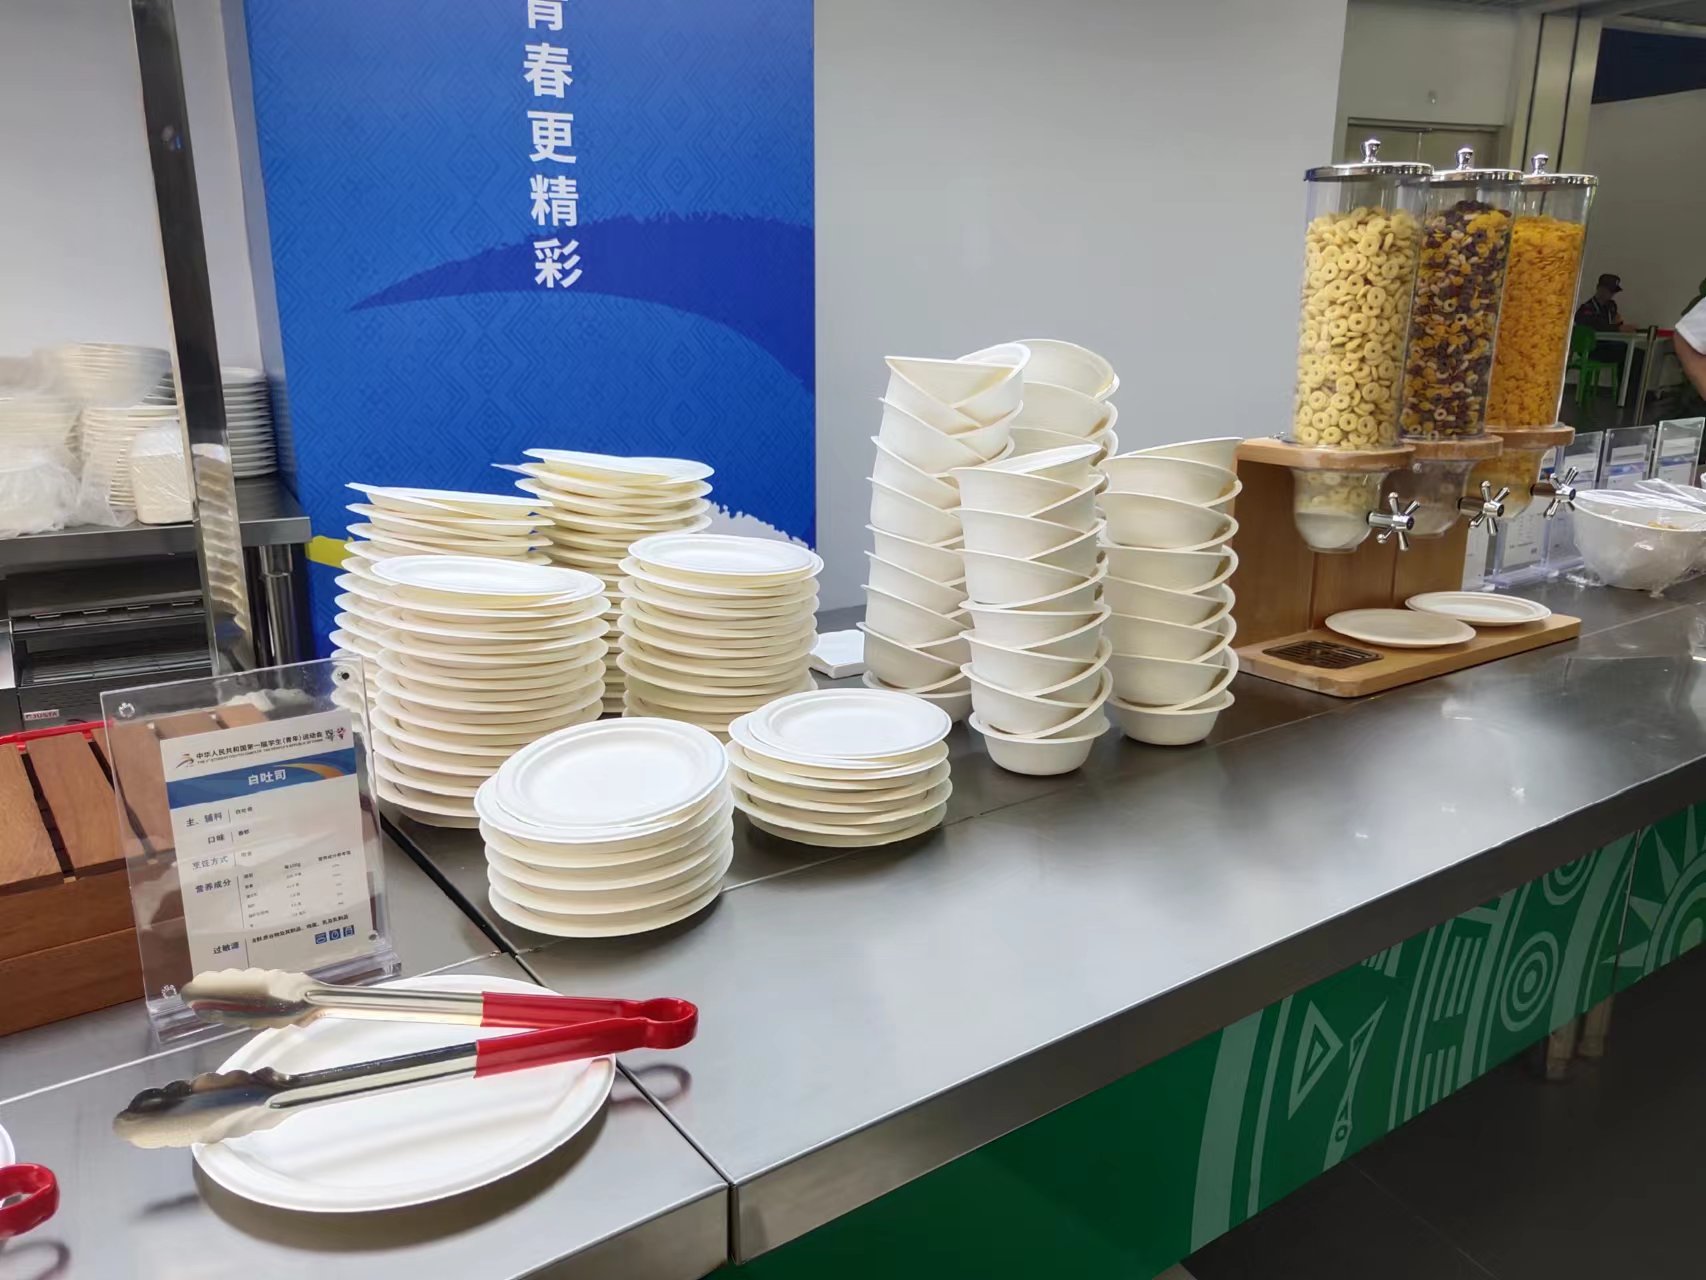 The role of MVI ECOPACK tableware in the 1st National Student (Youth) Games? compostable tableware, eco-friendly biodegradable tableware, eco-friendly products